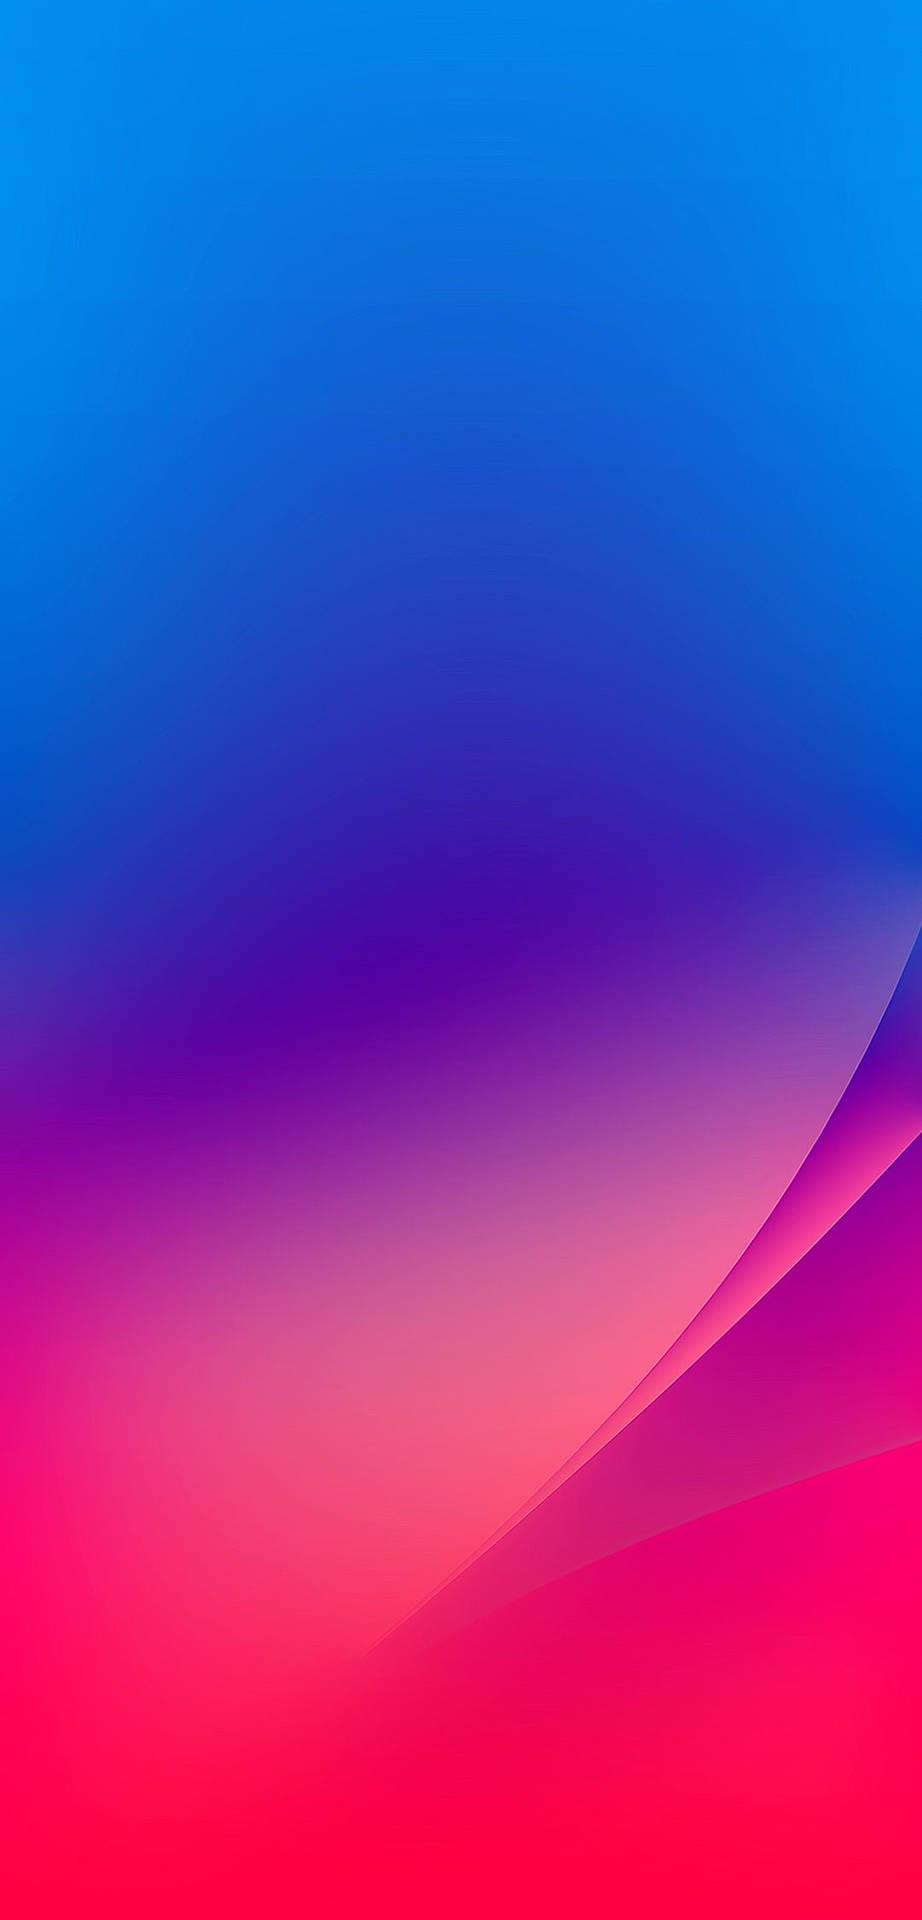 Iphone Xr Blue And Pink Picture